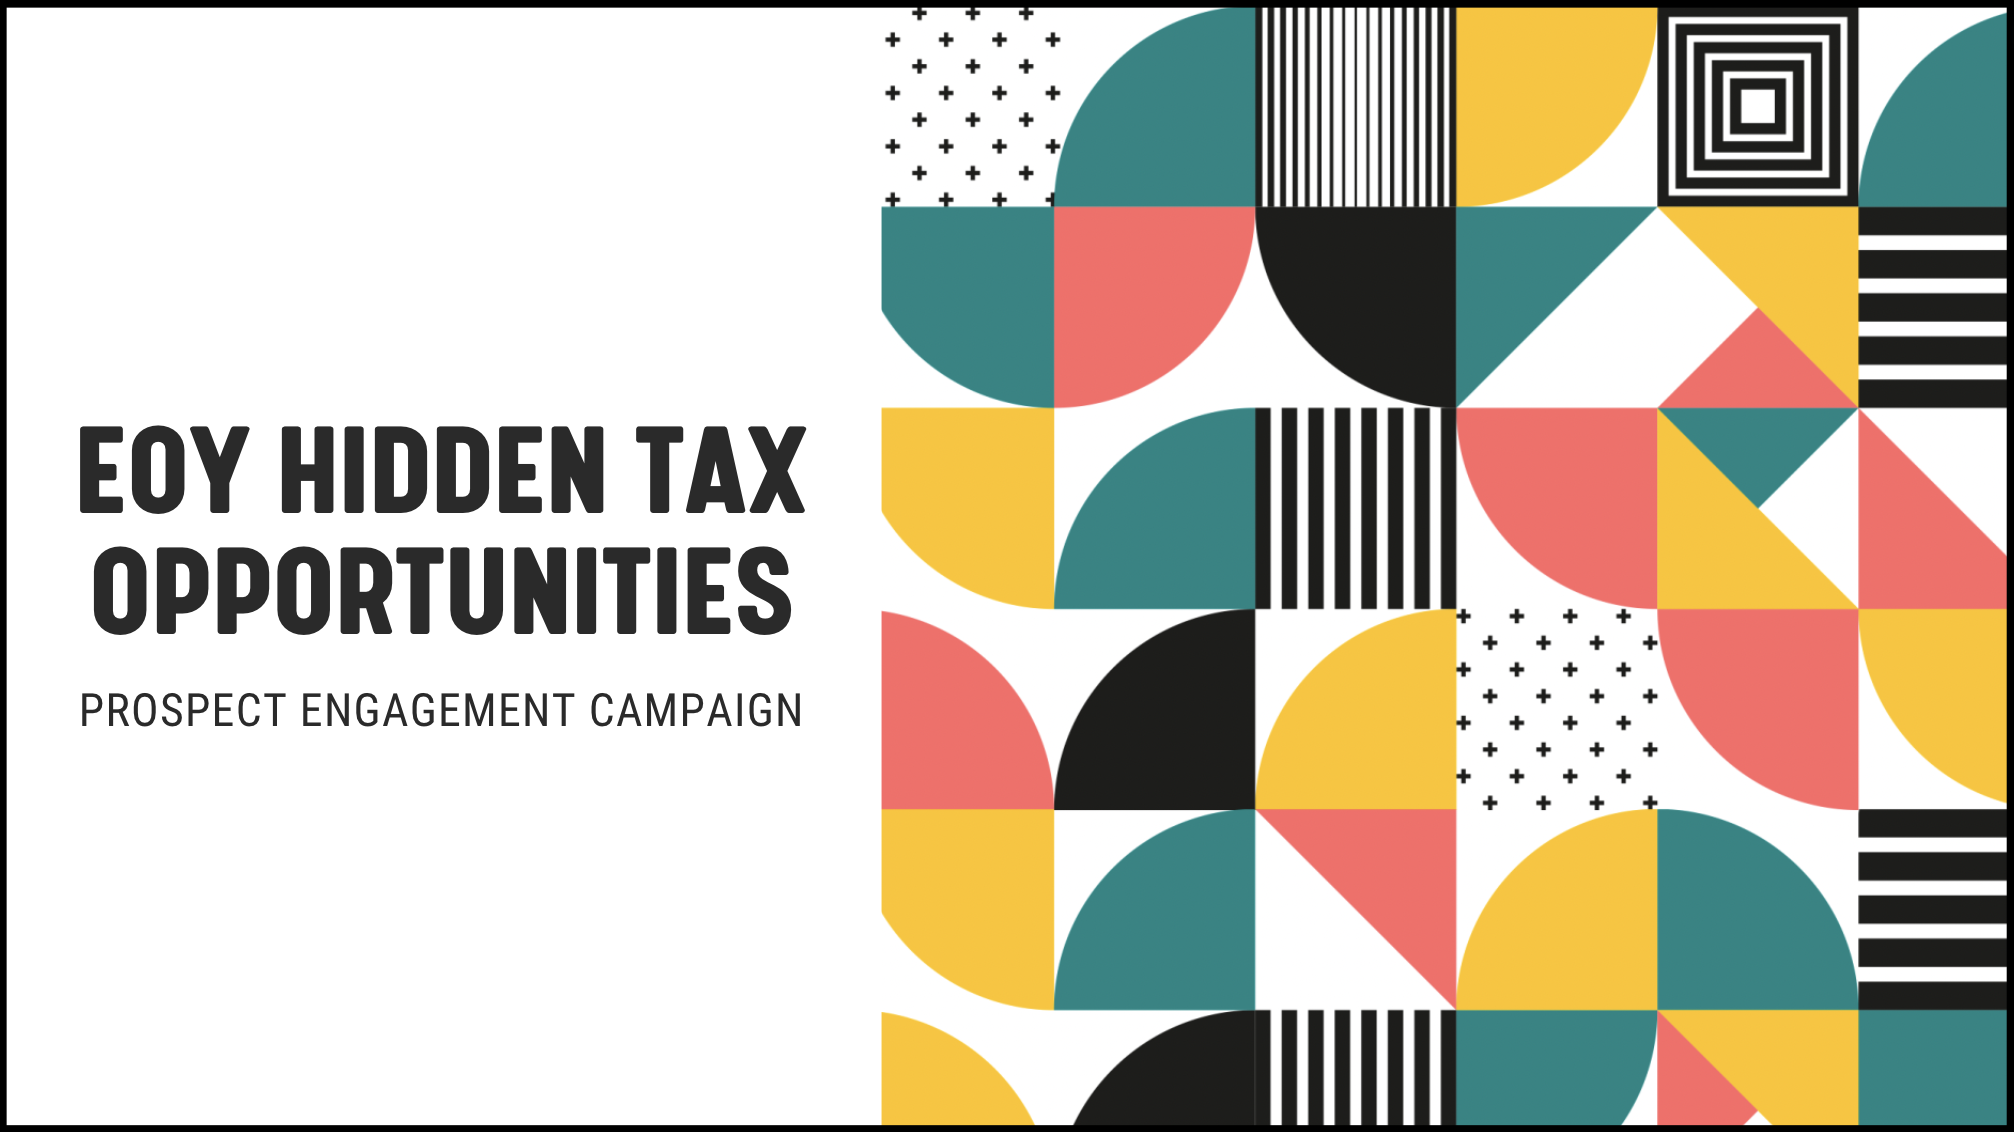 [NEW] EOY Hidden Tax Opportunities - Prospect Engagement Campaign for Financial Advisors